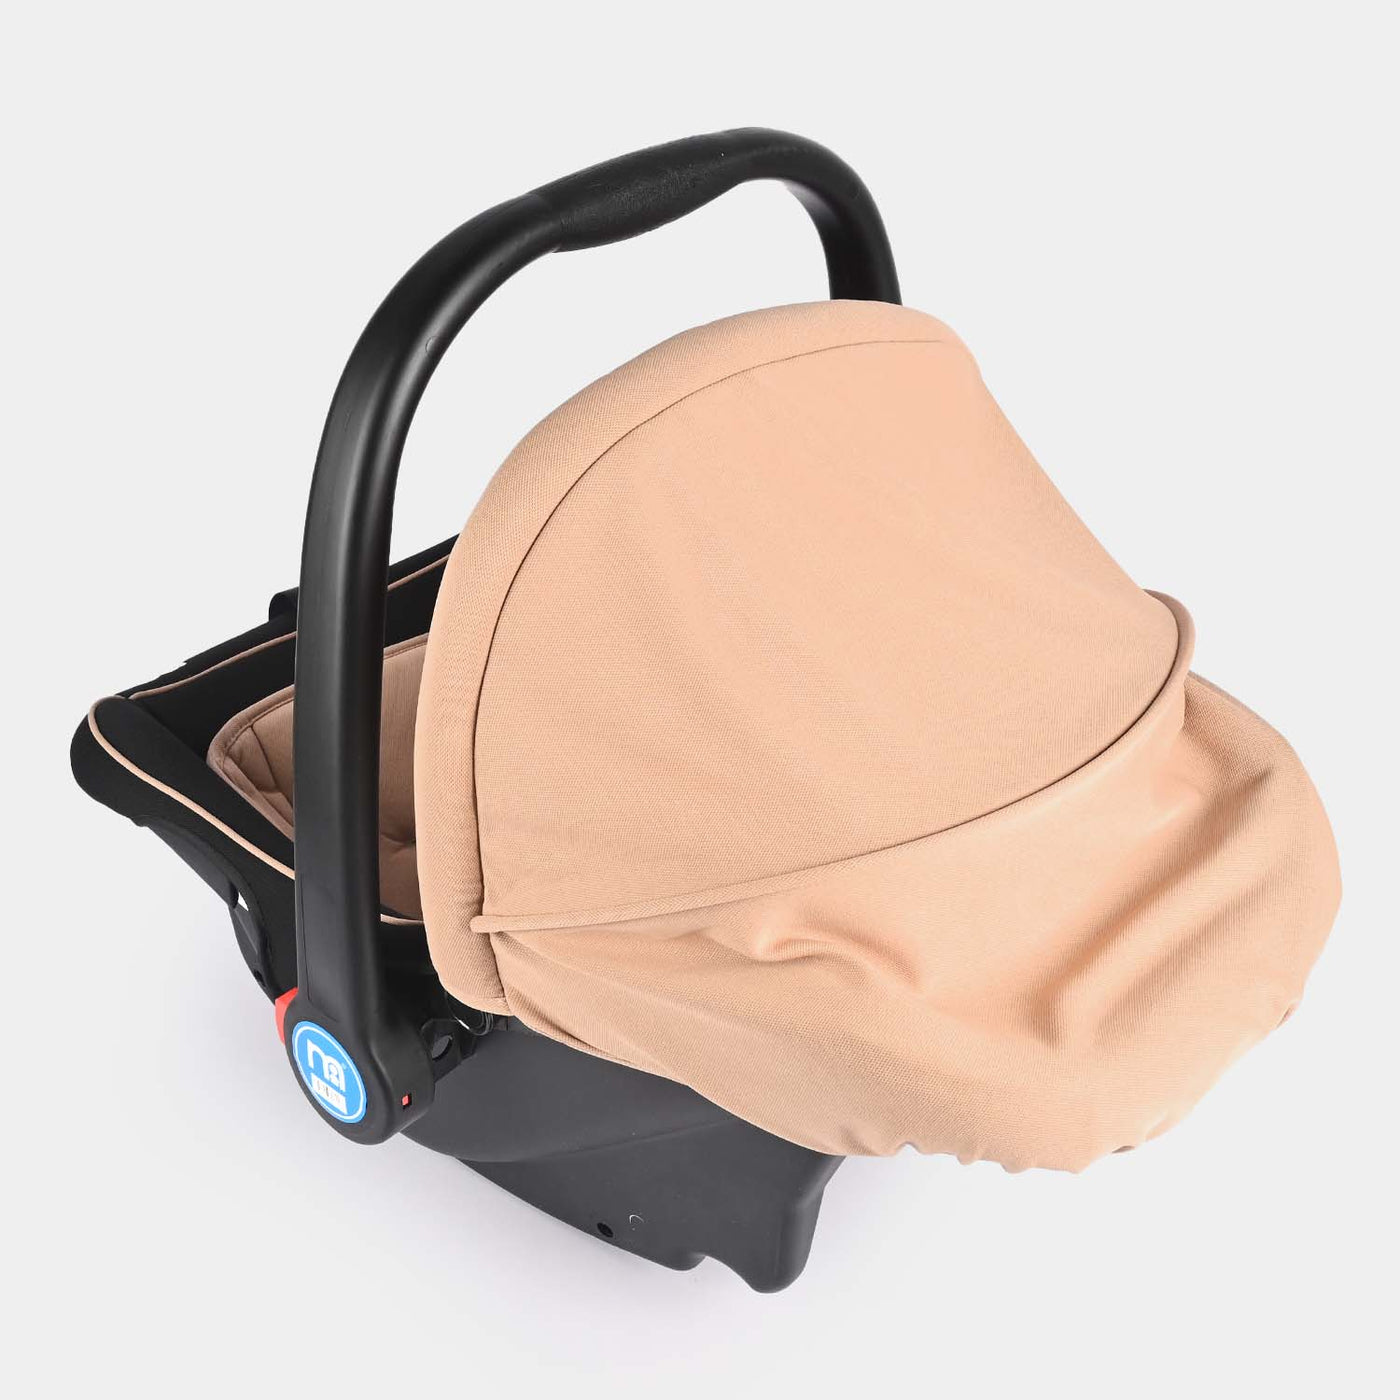 CARRY COT (Mothercare) Brown